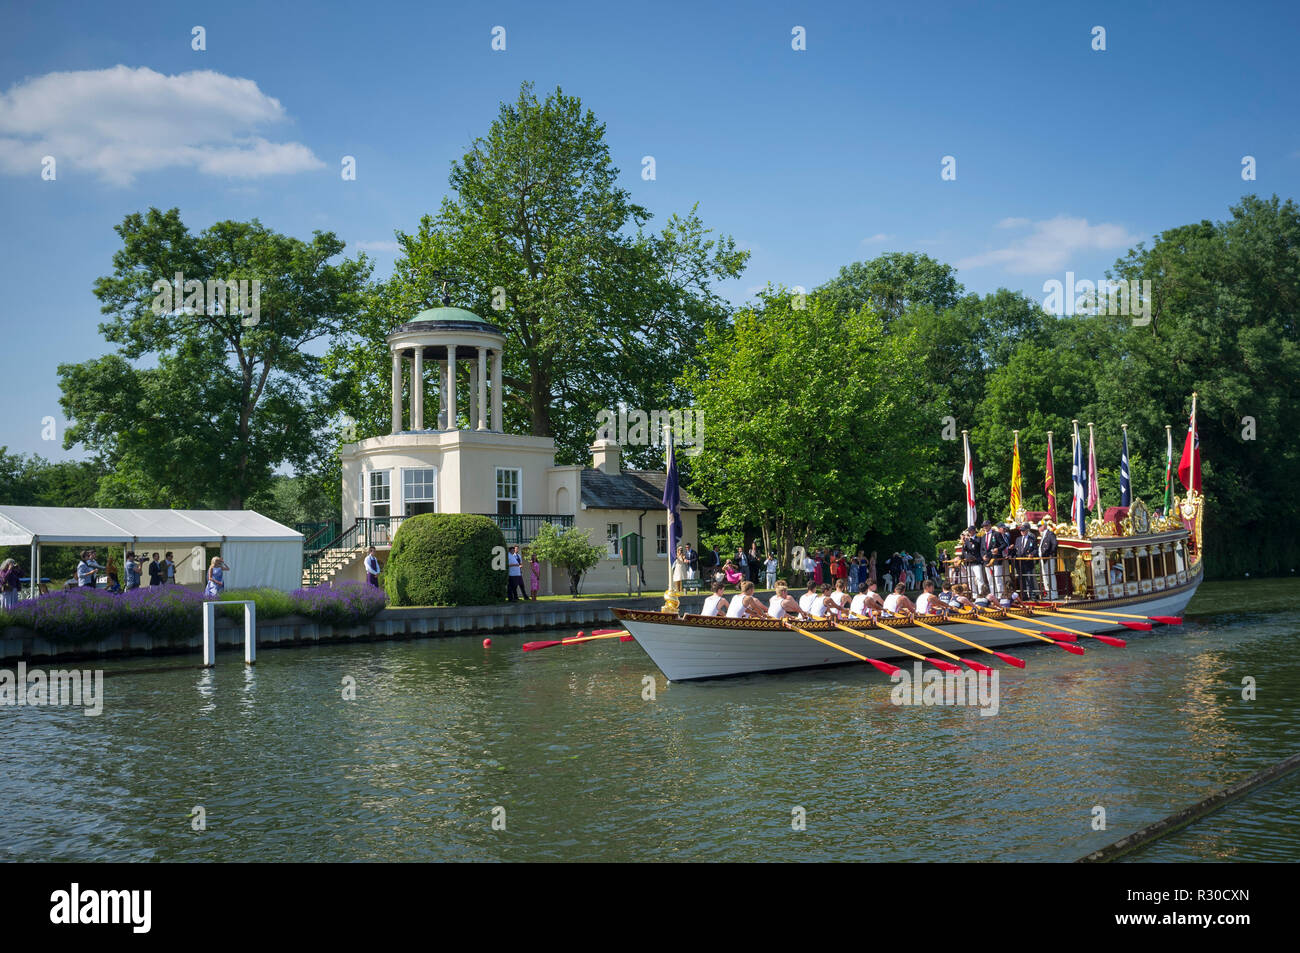 The Queen's row barge Gloriana passes Temple Island at Henley Royal Regatta, Henley-on-Thames, Oxfordshire Stock Photo